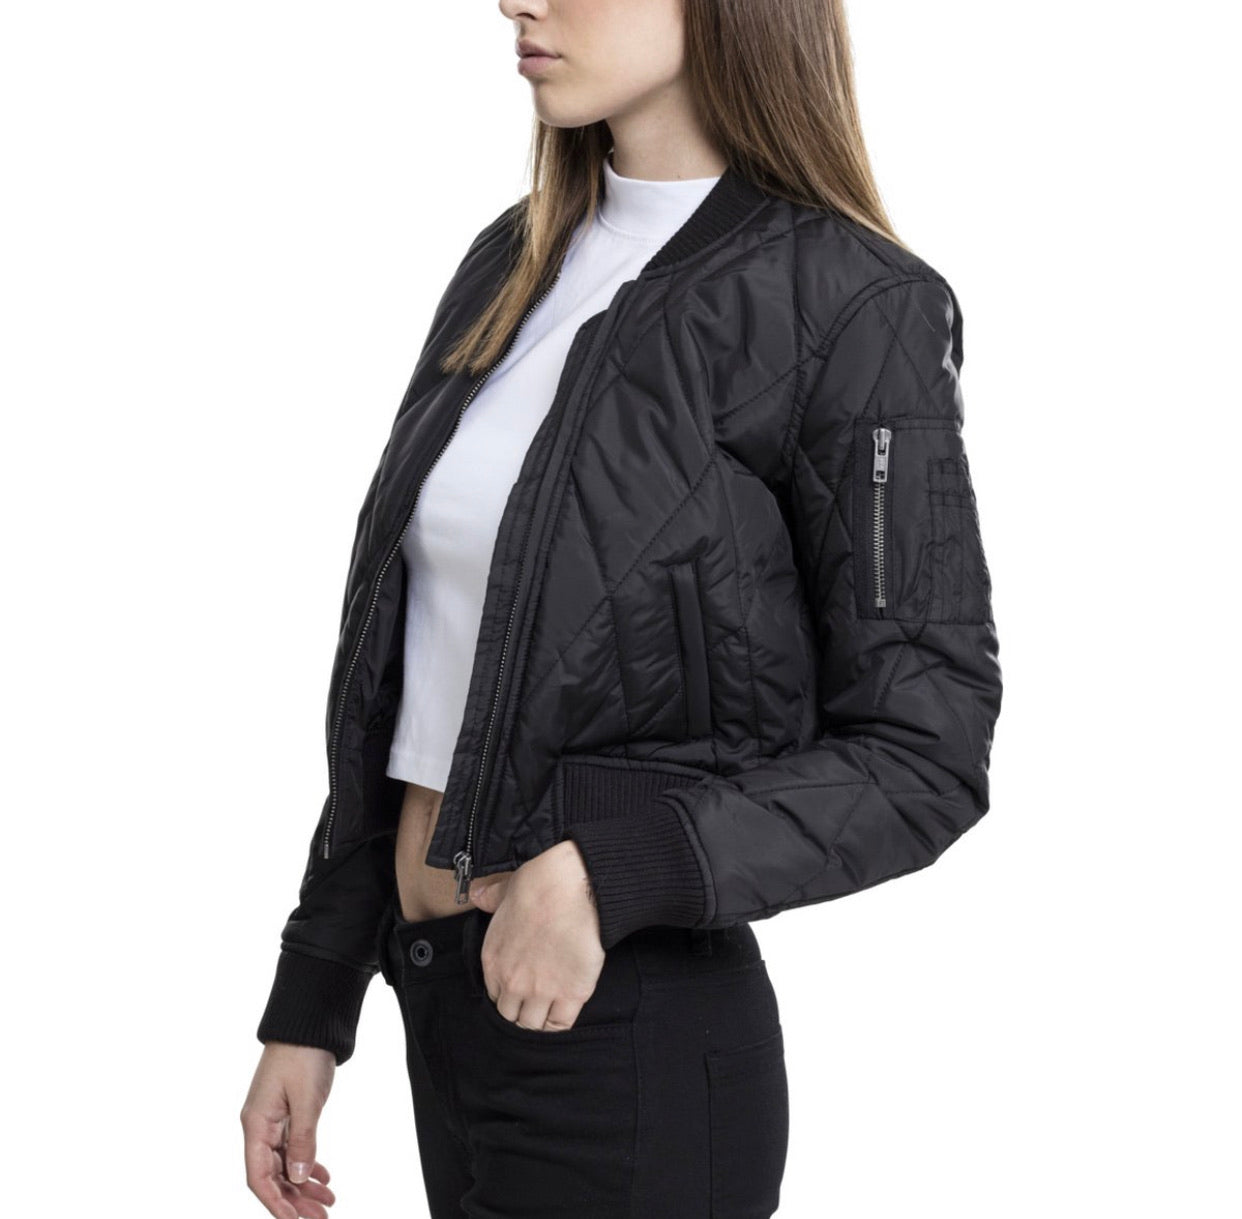 The Women’s Quilted Bomber Jacket - Up to Size XXL